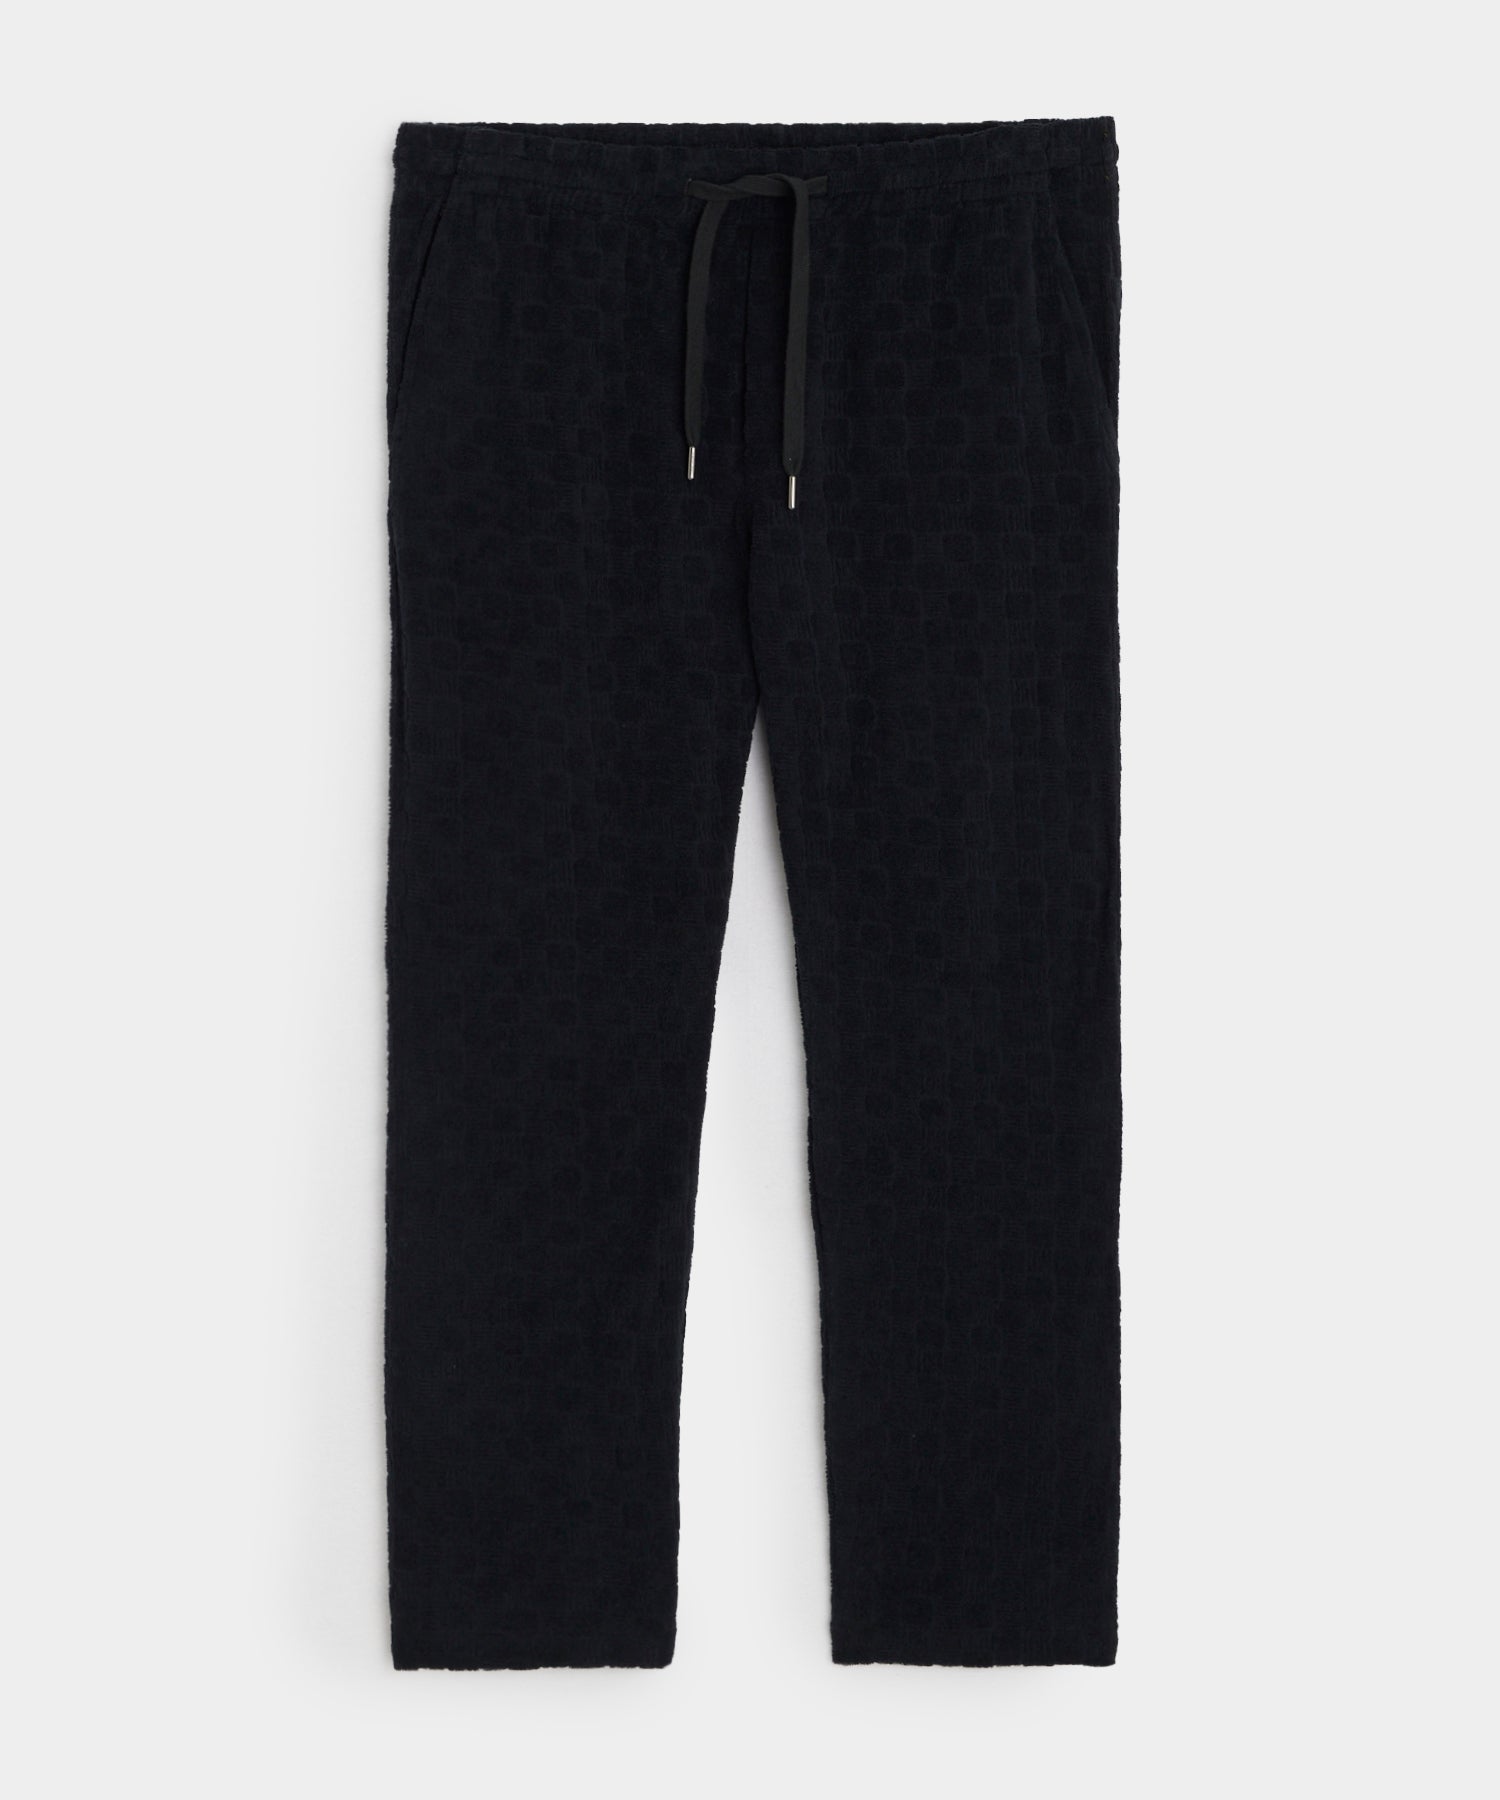 Tile Terry Beach Pant in Pitch Black